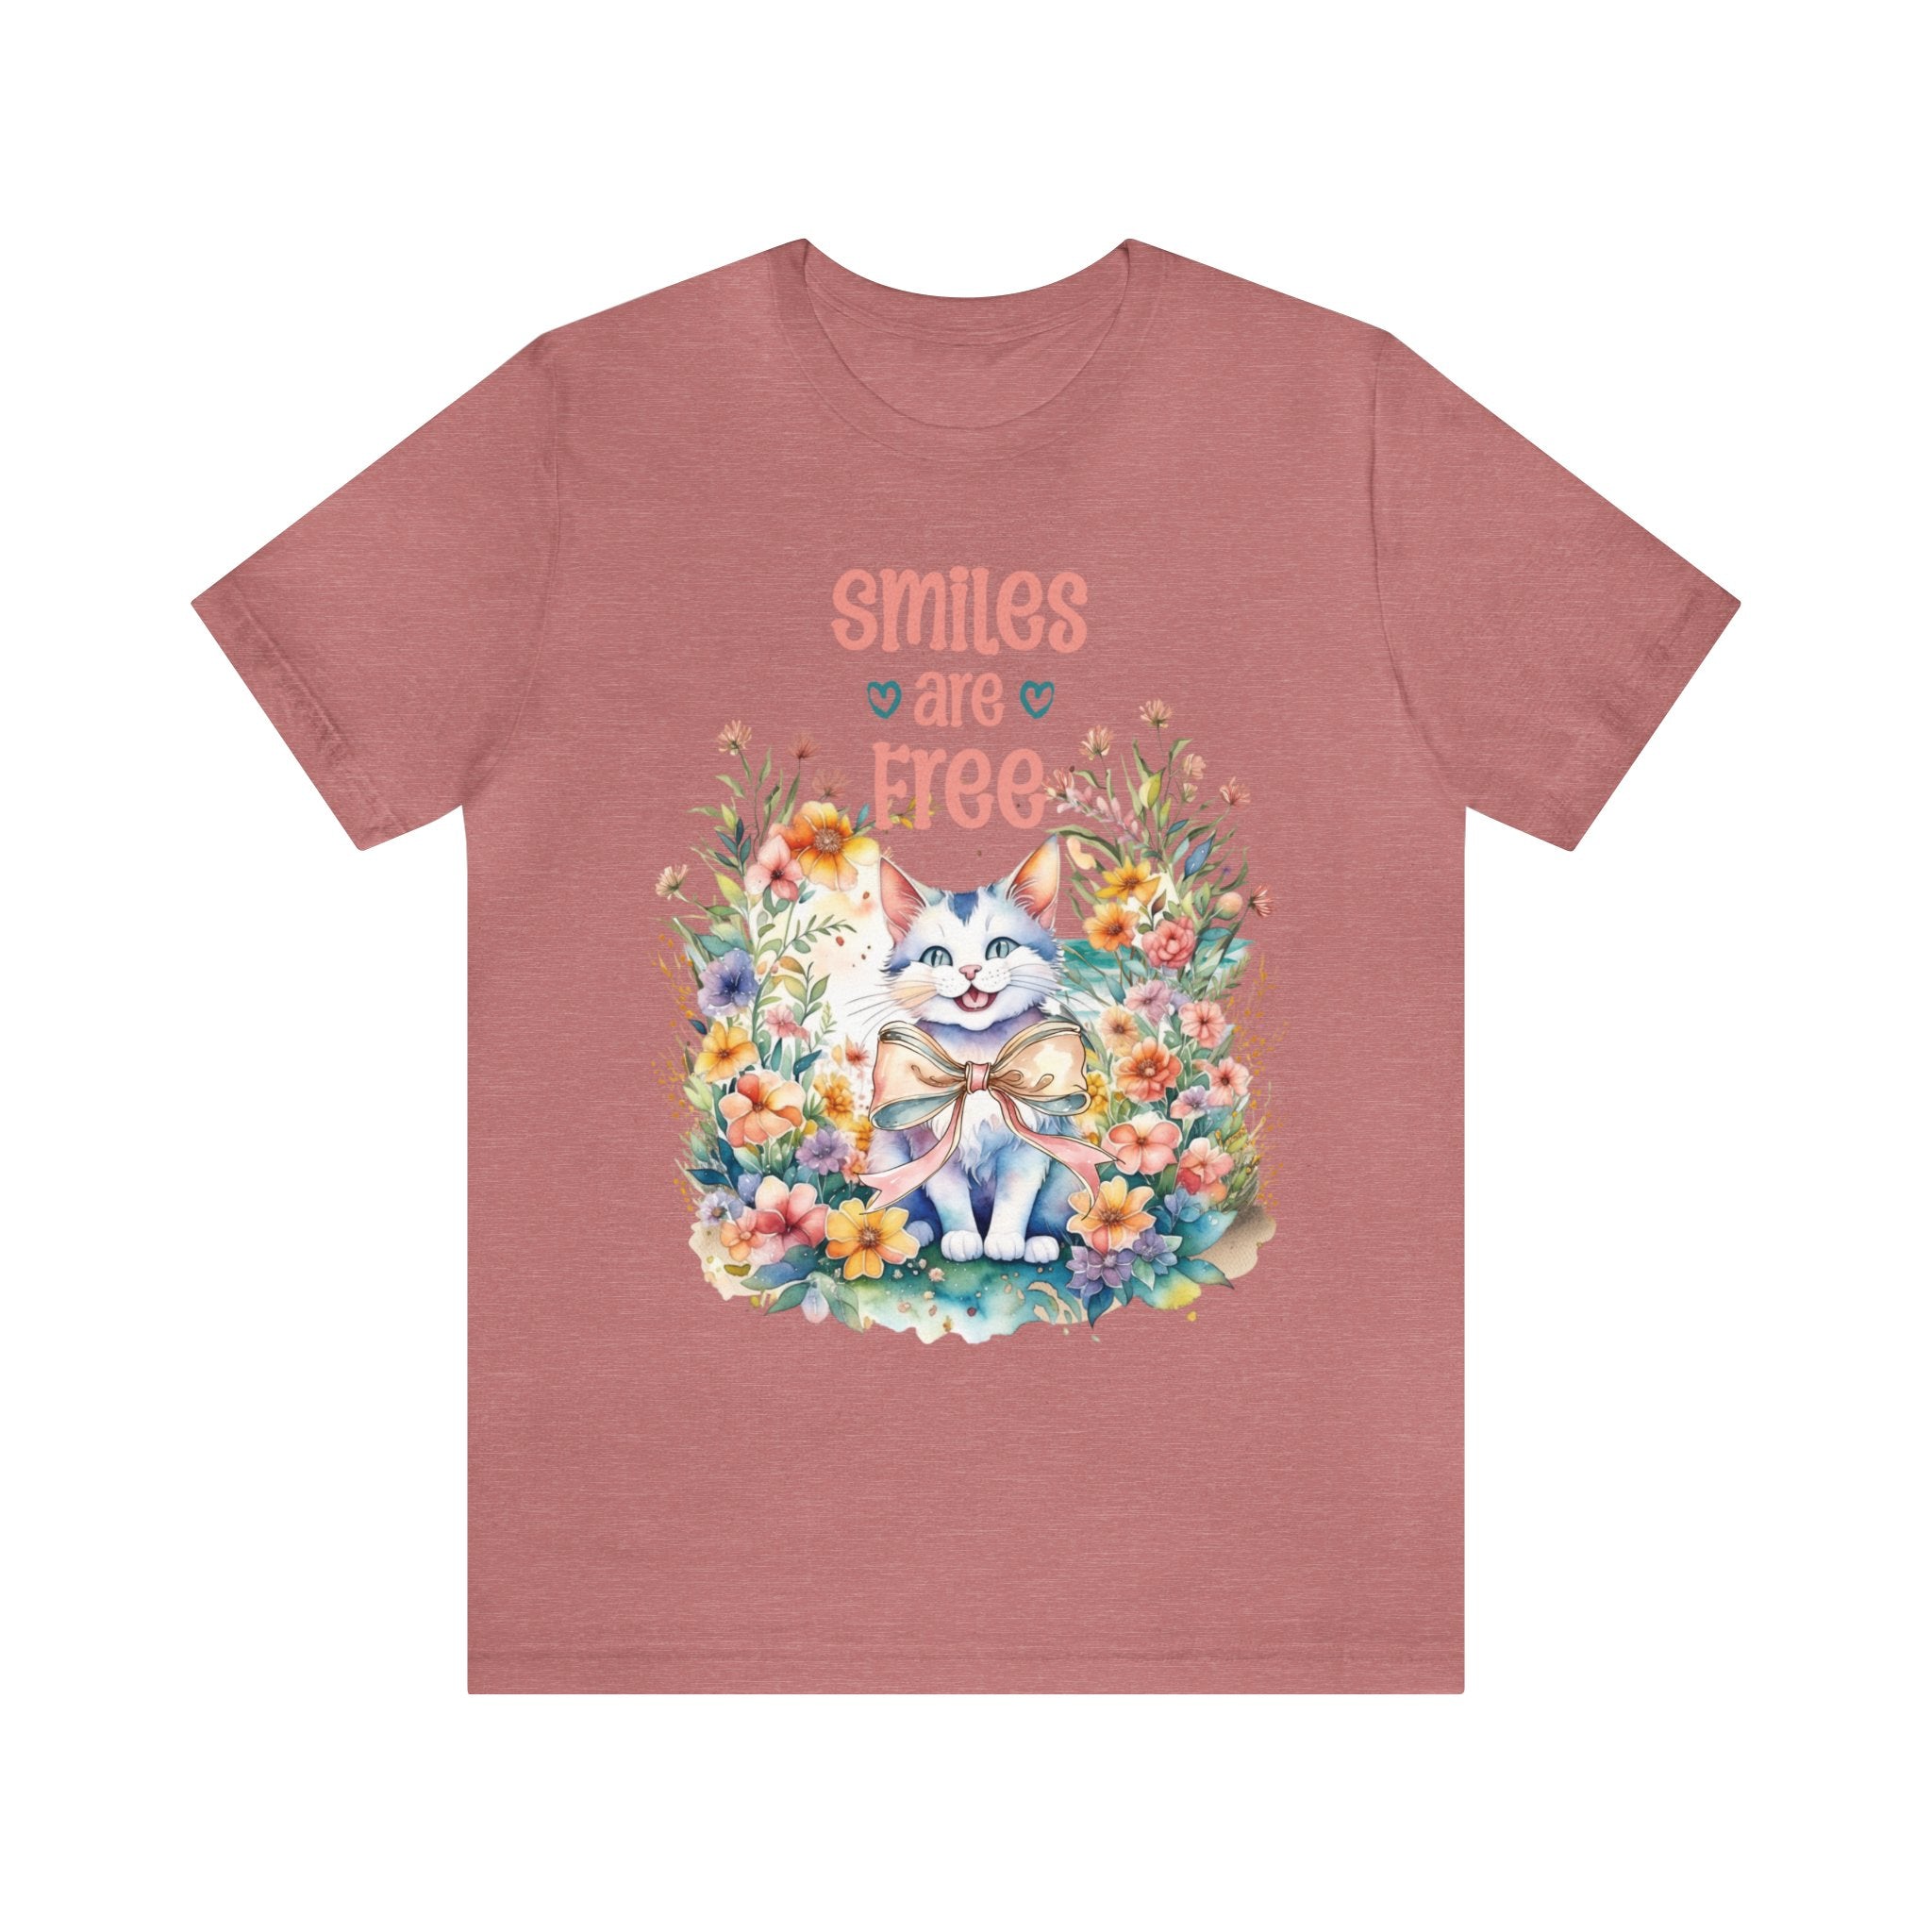 "Smiles are Free" Smiling Cat Tee - Unleash Your Inner Purr-sitivity! - MTL Dynamic StylesT-Shirt